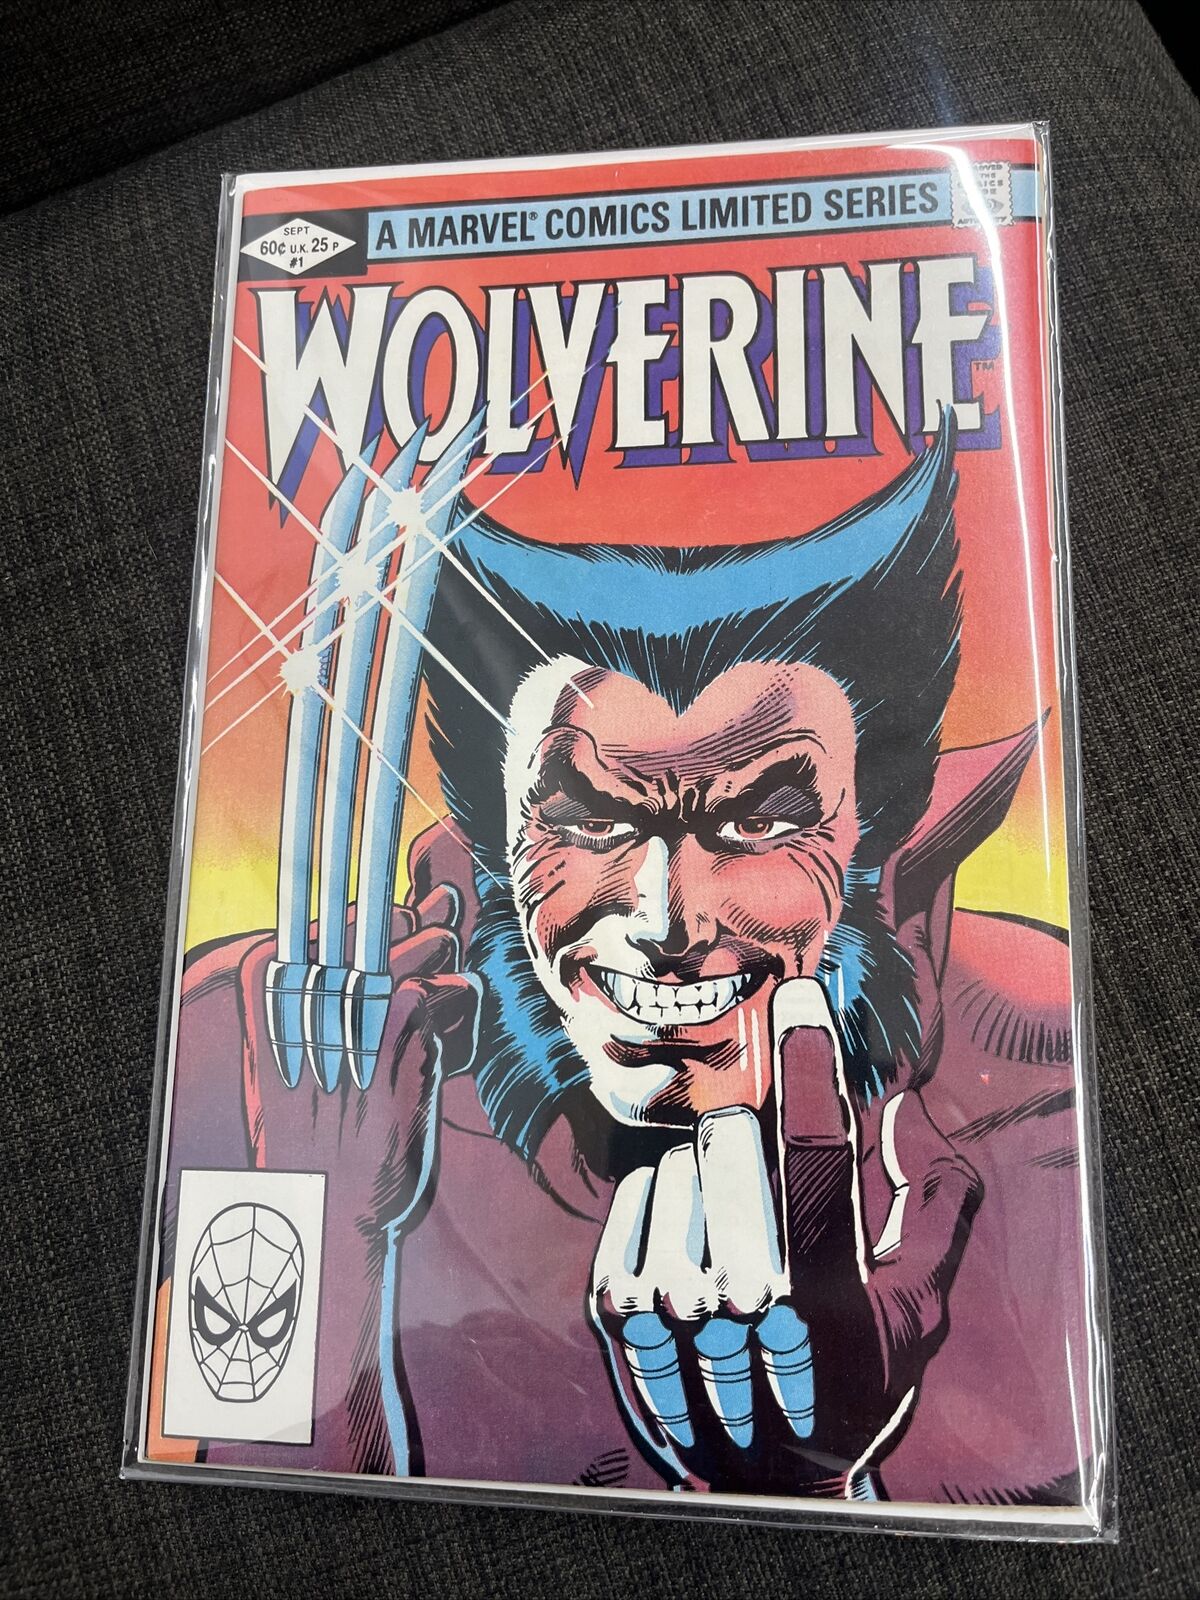 Wolverine Issues 1-4 Nm